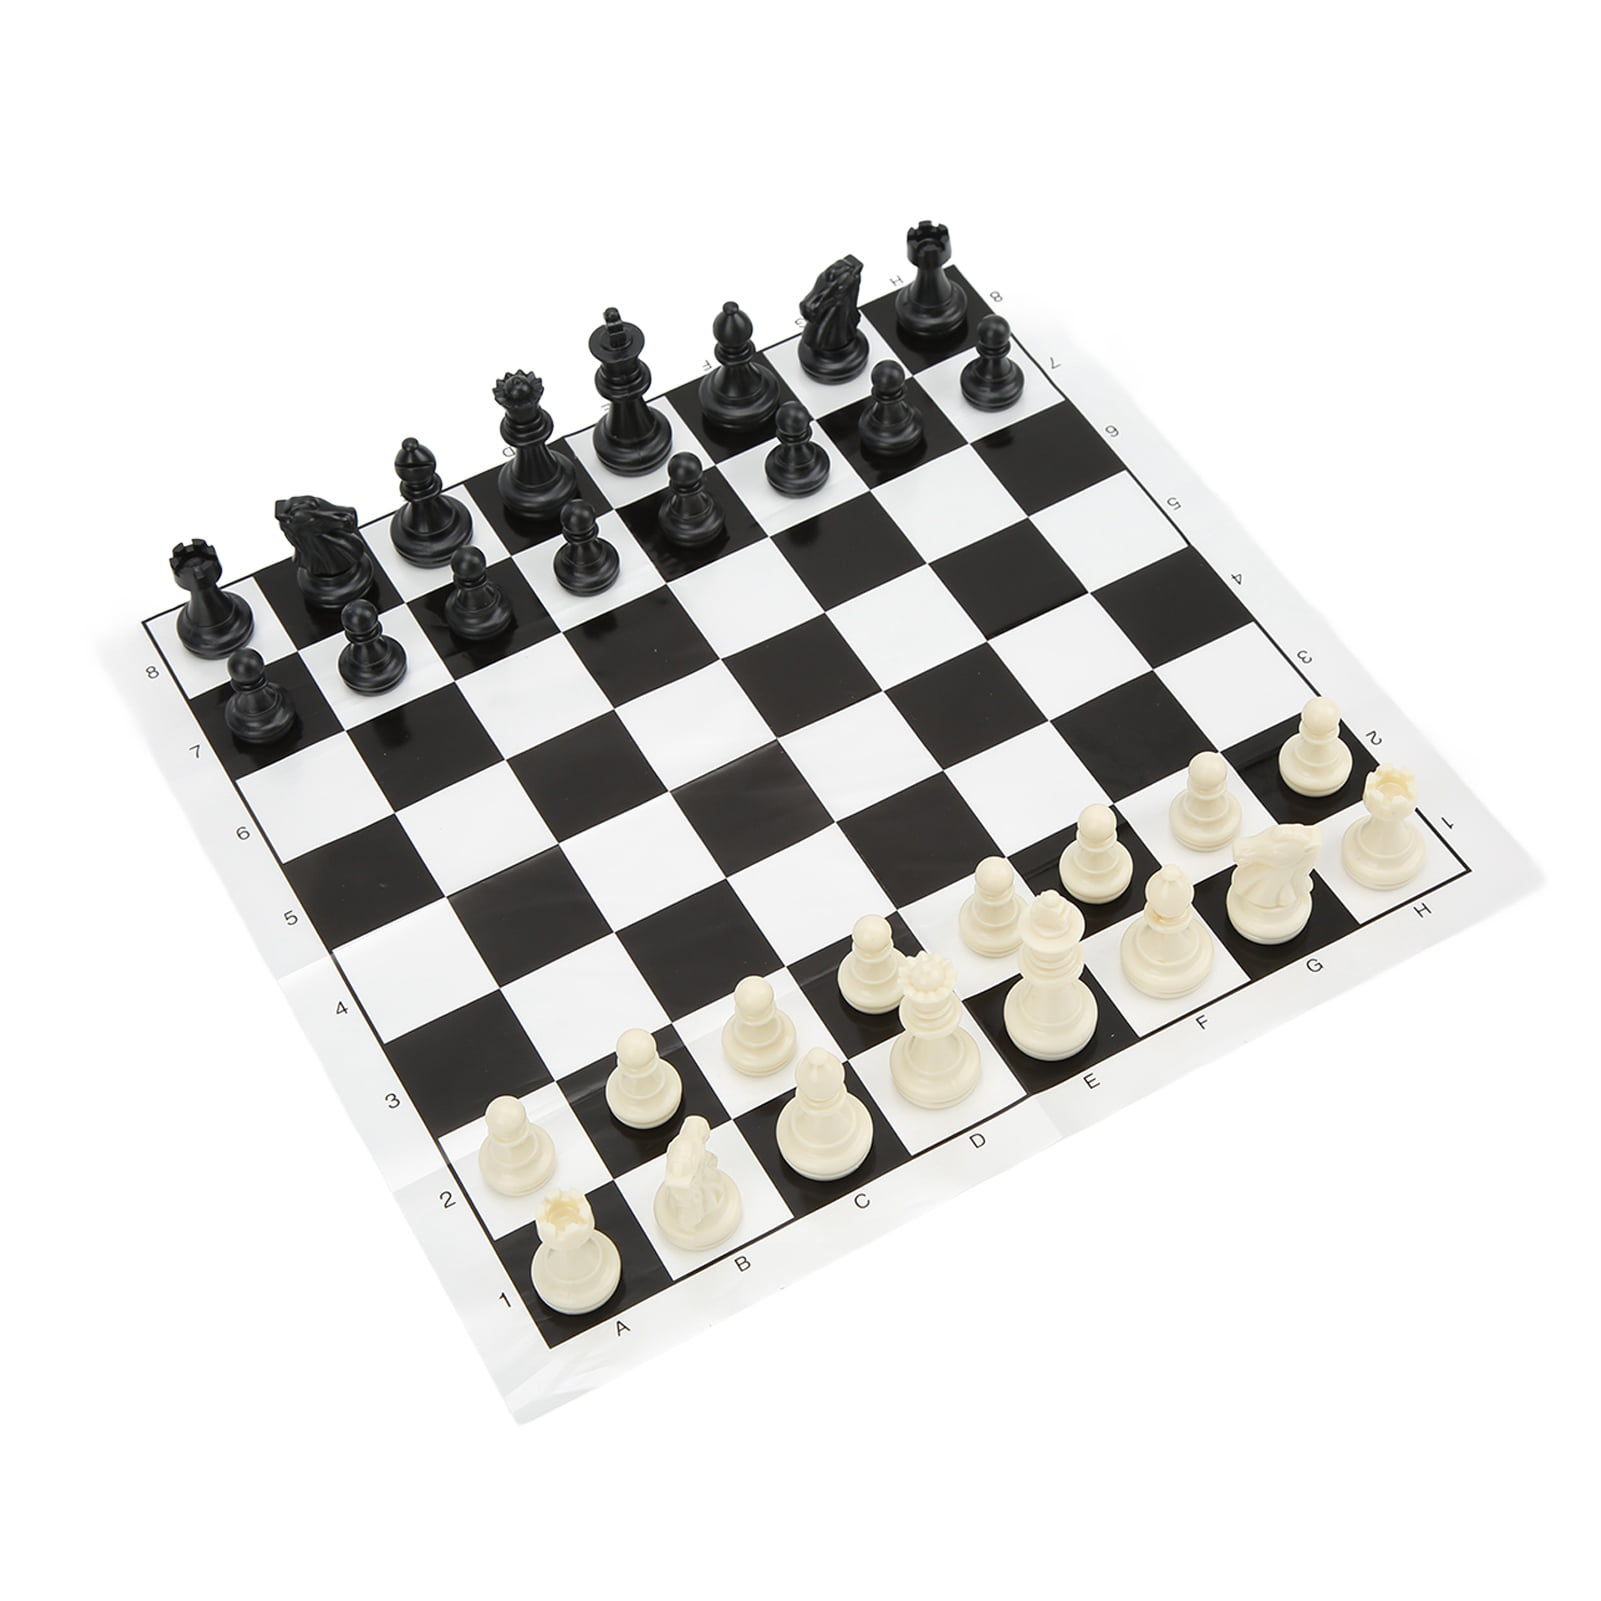 Prada on Instagram: “Prada holiday gifts 2015. Saffiano leather chess set,  with metal playing pieces.”